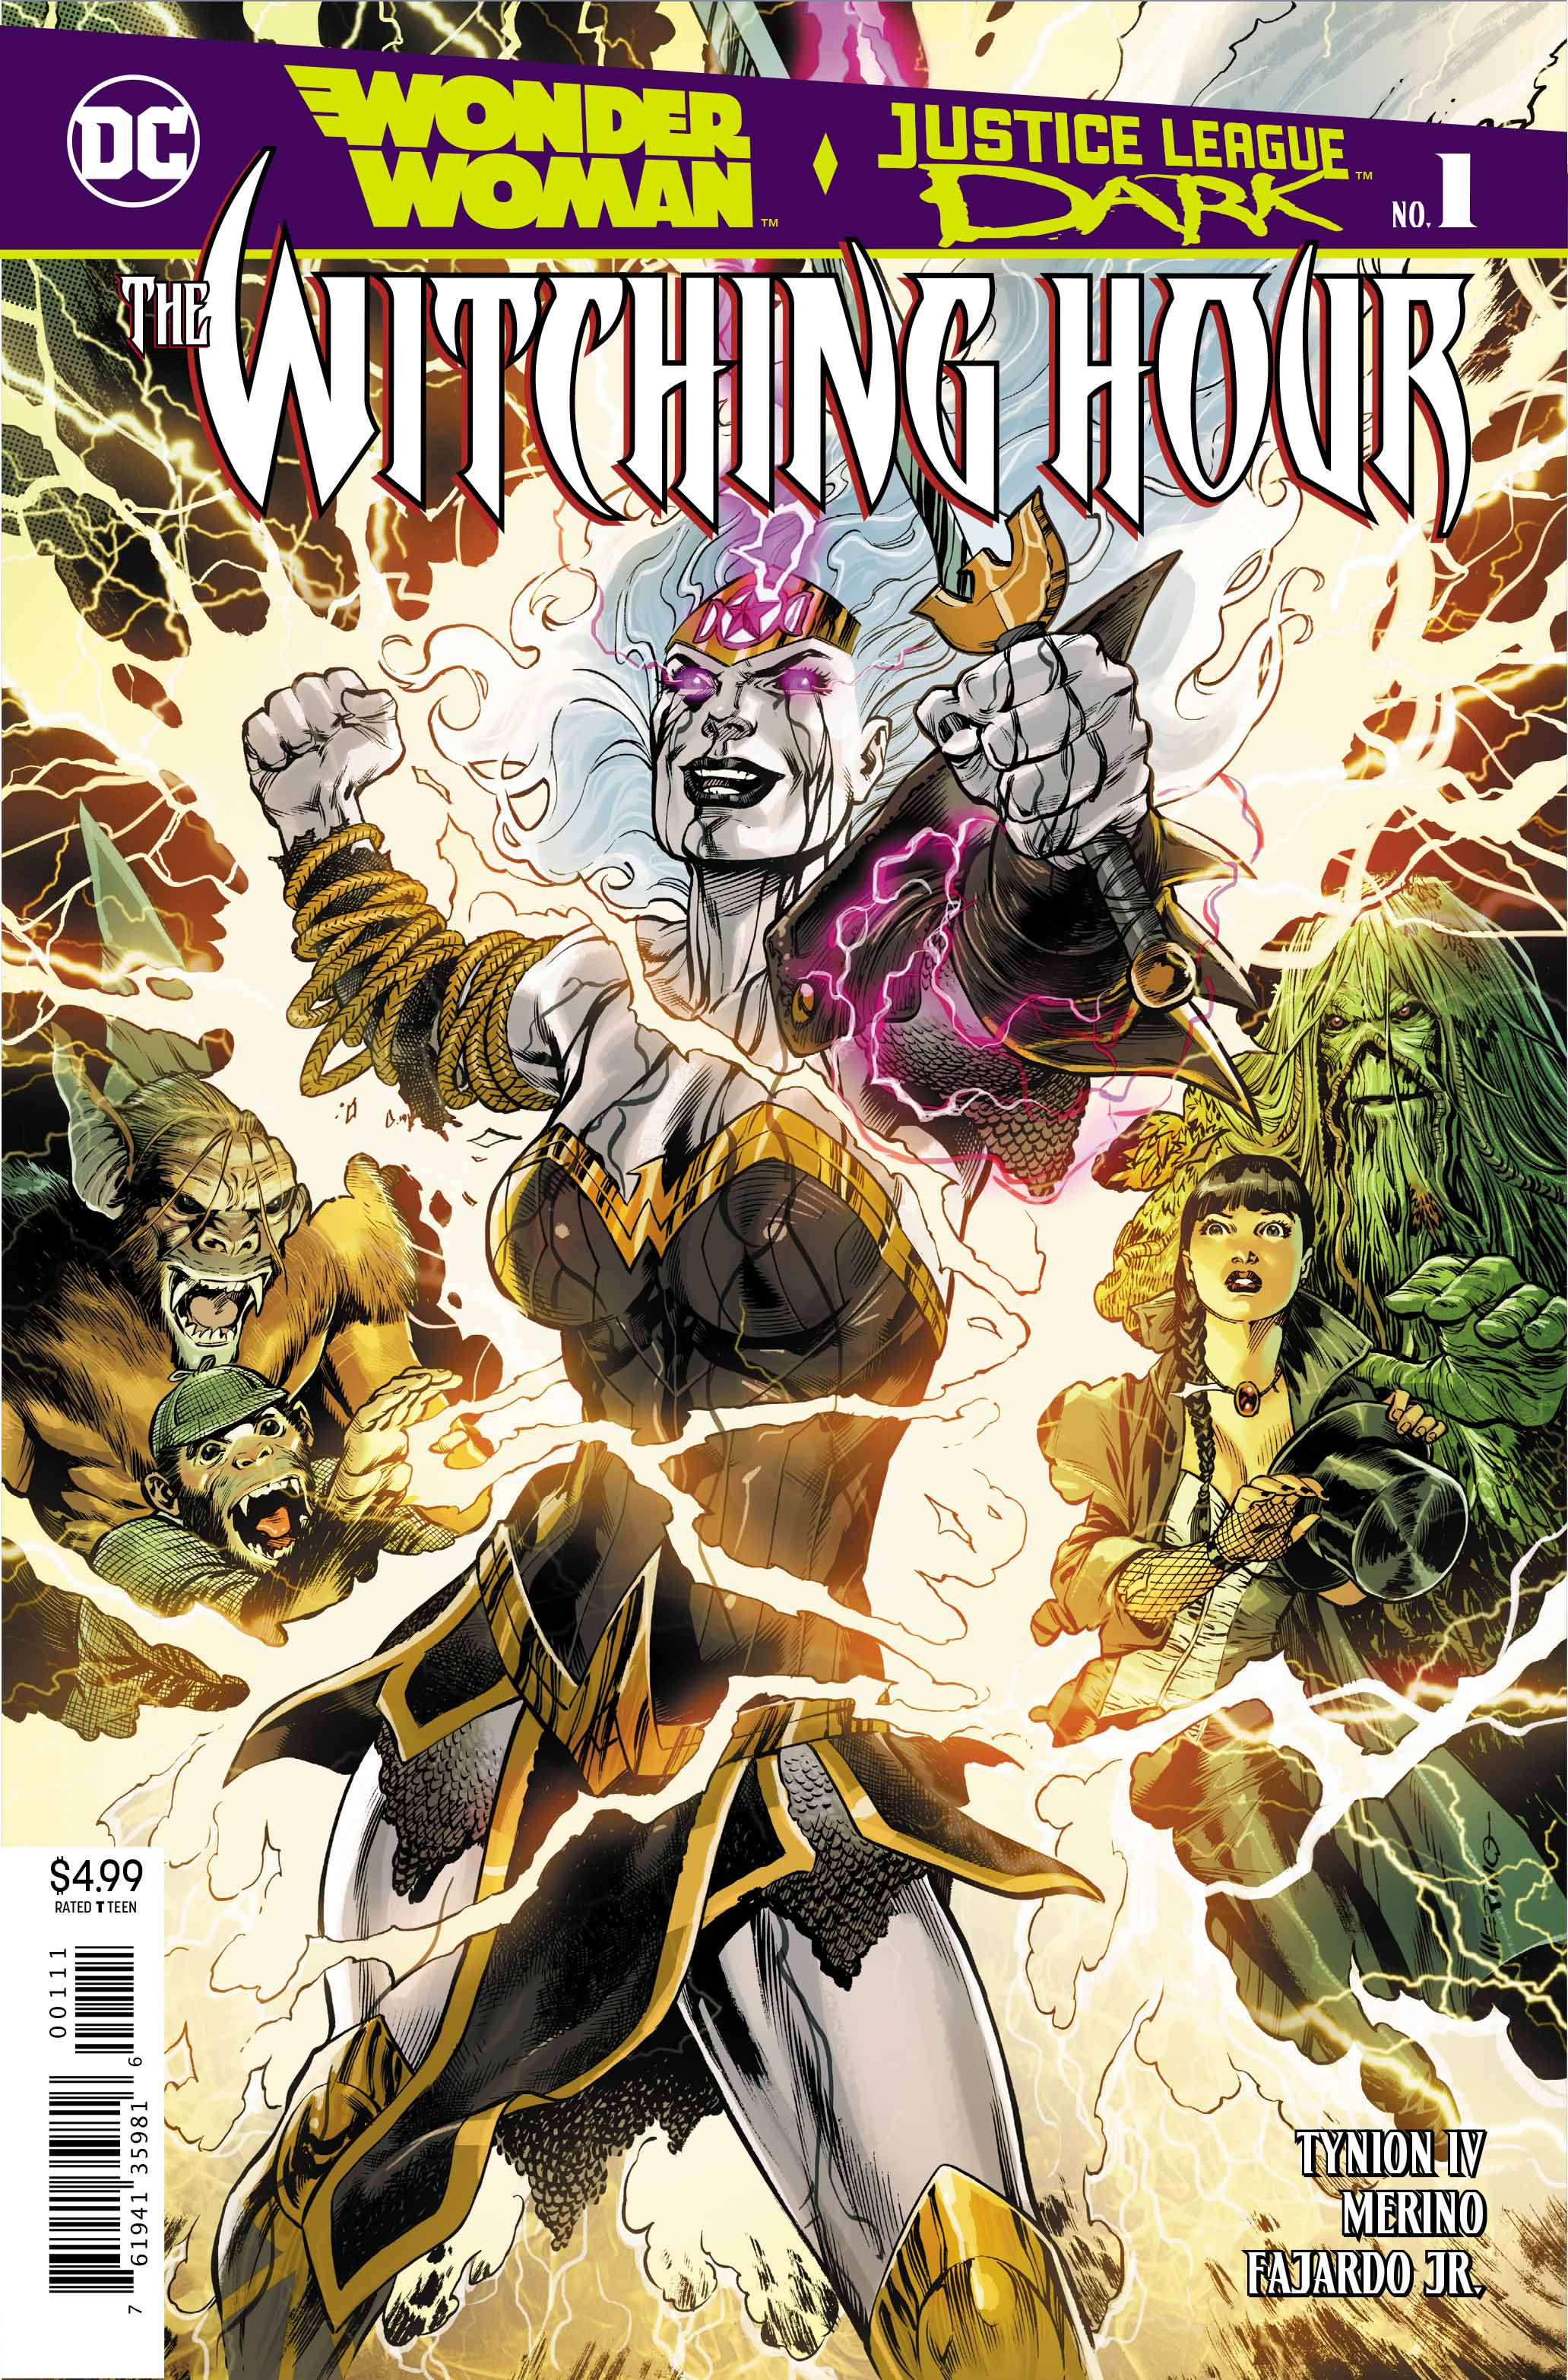 Wonder Woman and Justice League Dark: The Witching Hour #1 Review